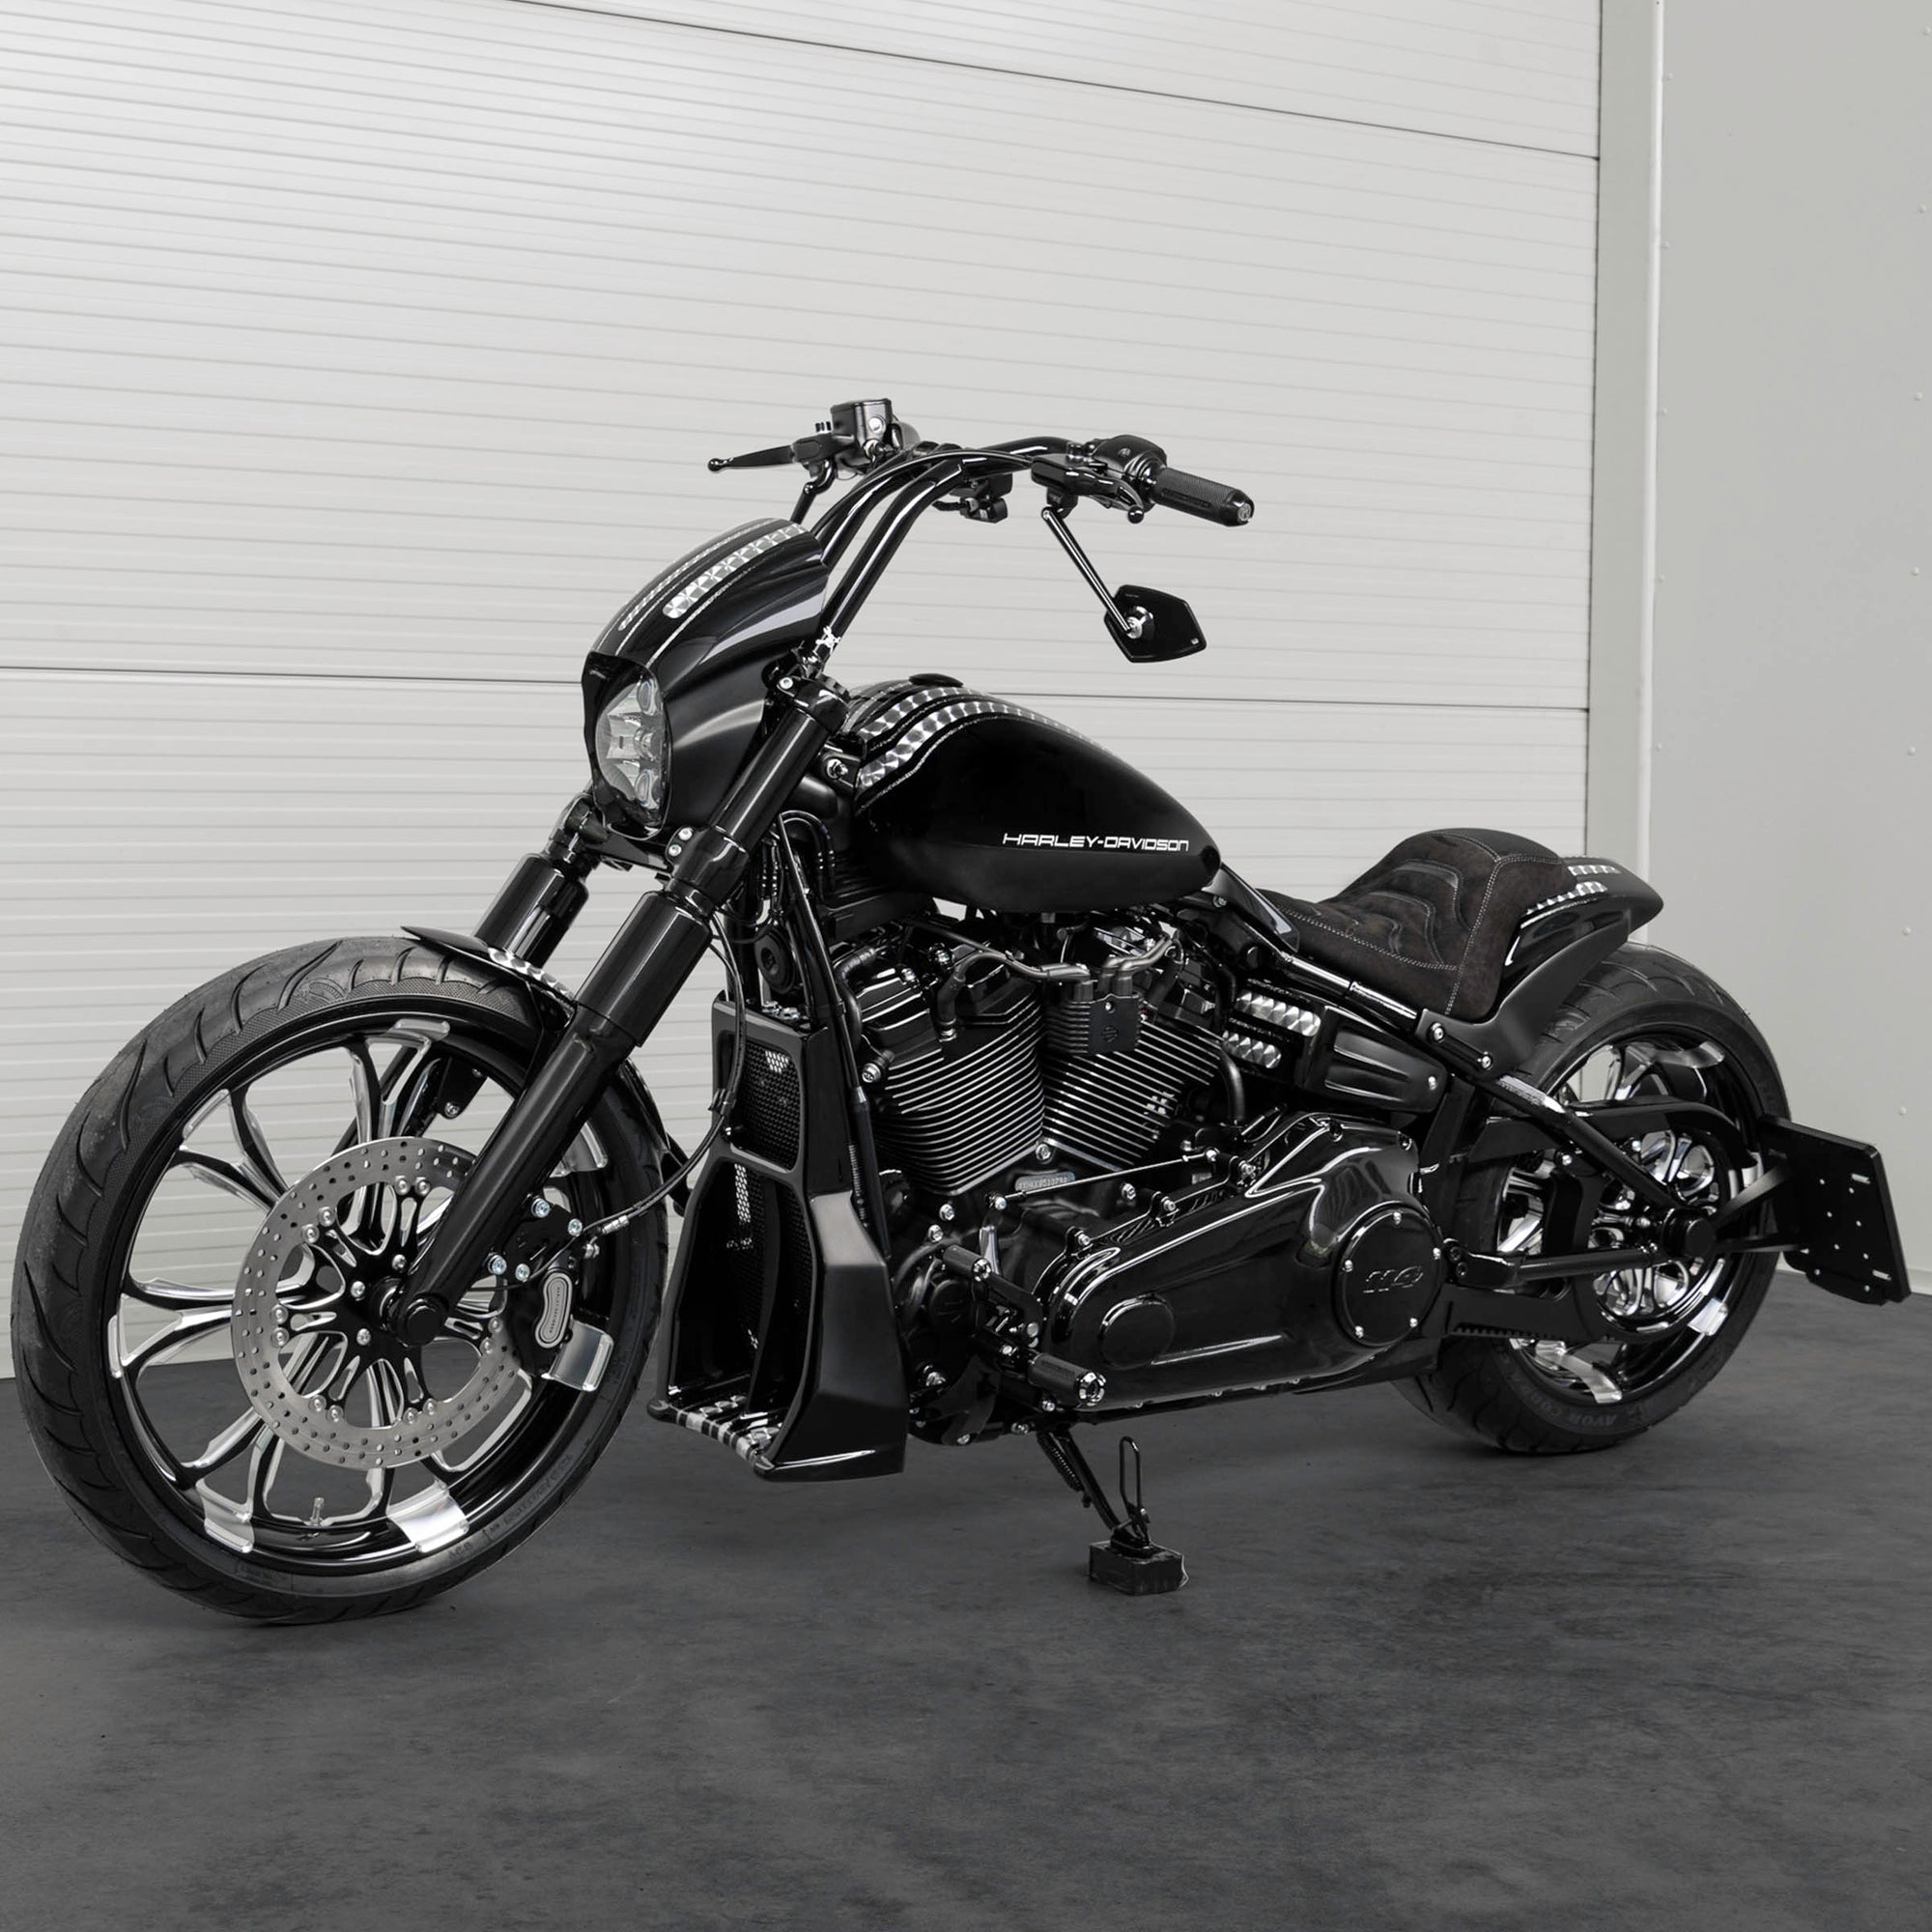 Harley Davidson motorcycle with Killer Custom parts from the side in a white modern bike shop